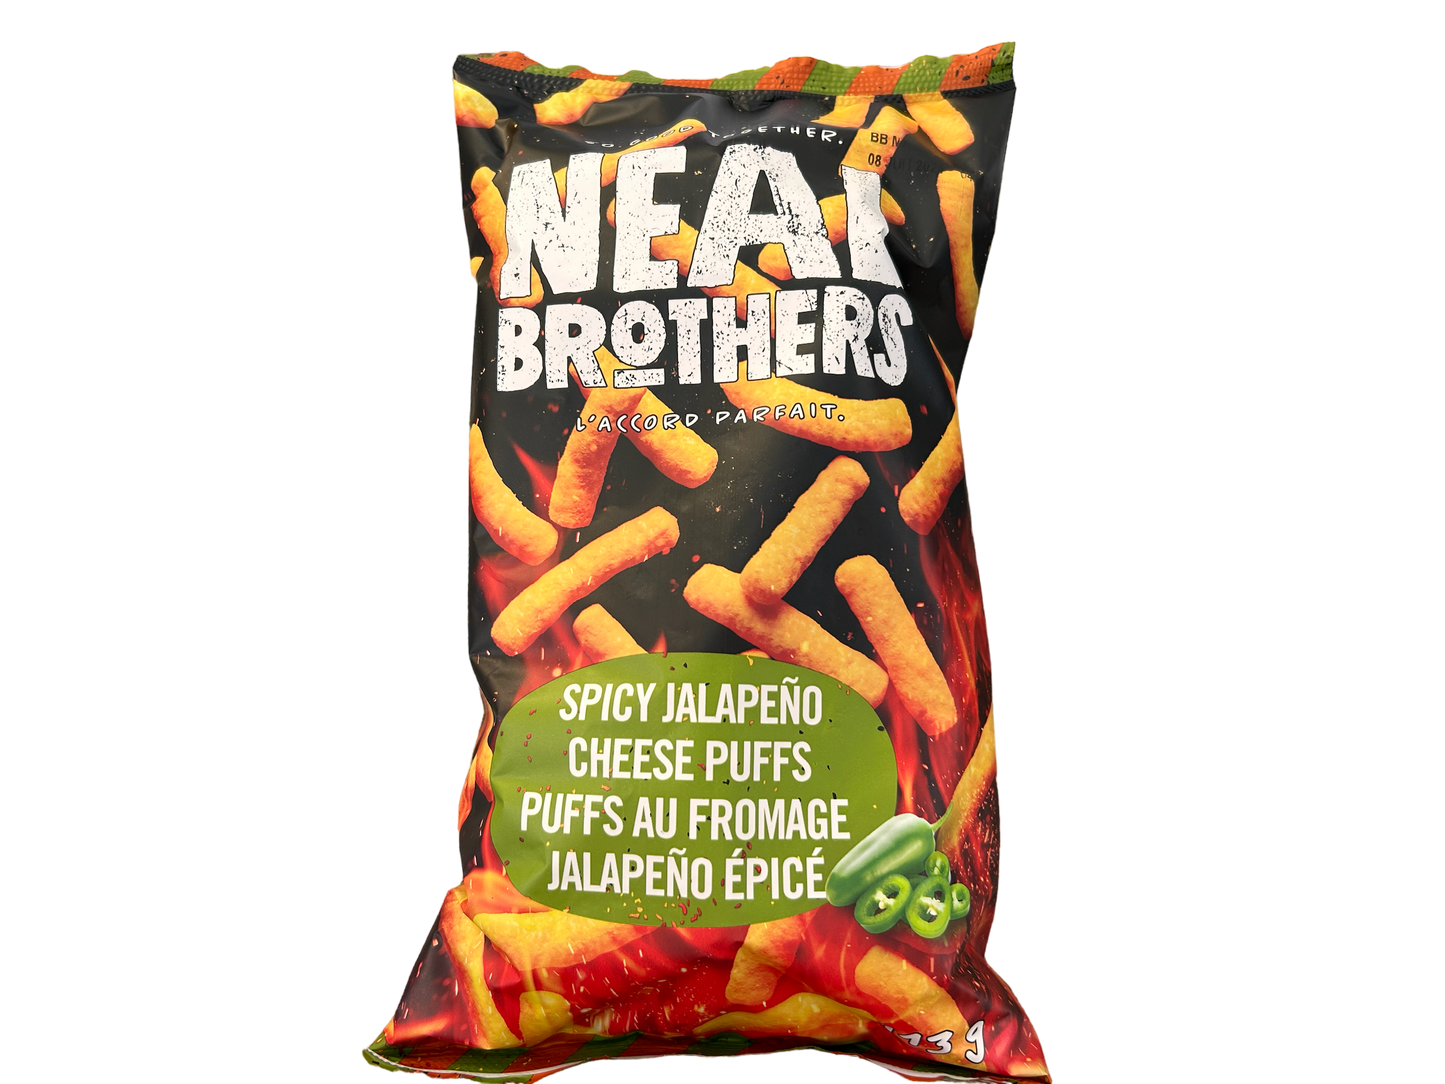 Neal Brothers - spicy jalapeño cheese puffs